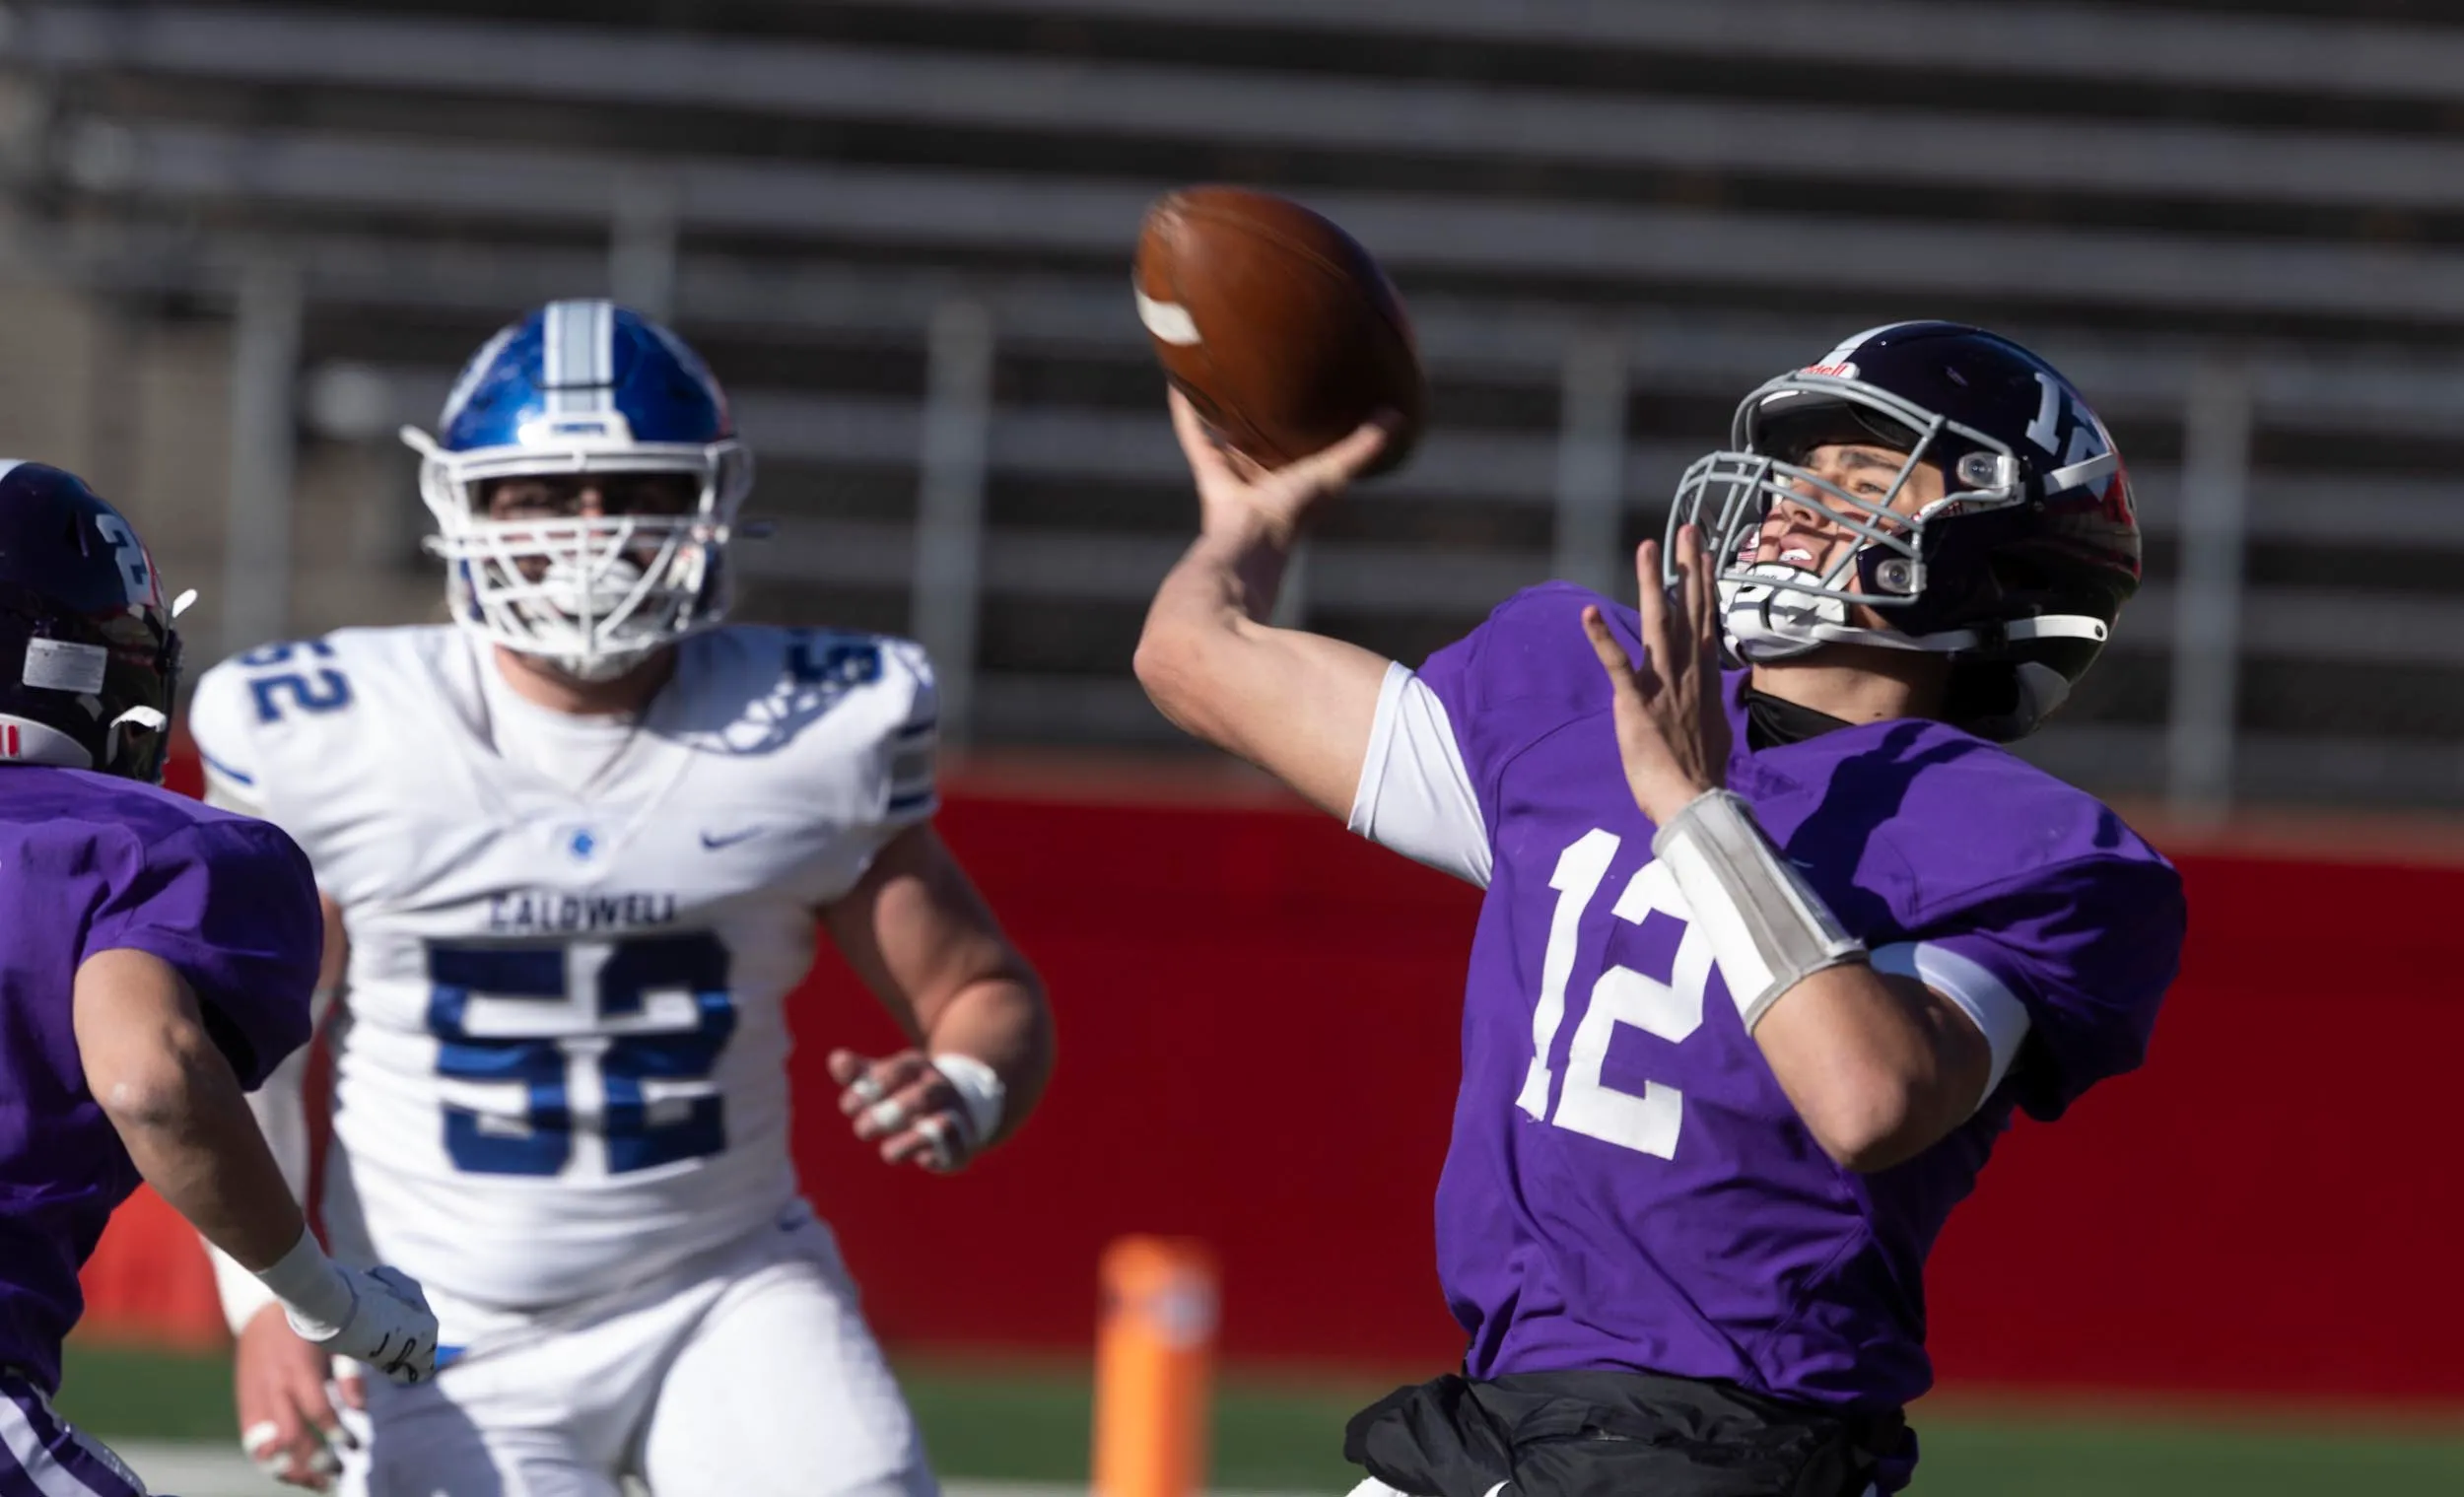 Rumson-Fair Haven football nearly shocks undefeated Caldwell in first state title bid